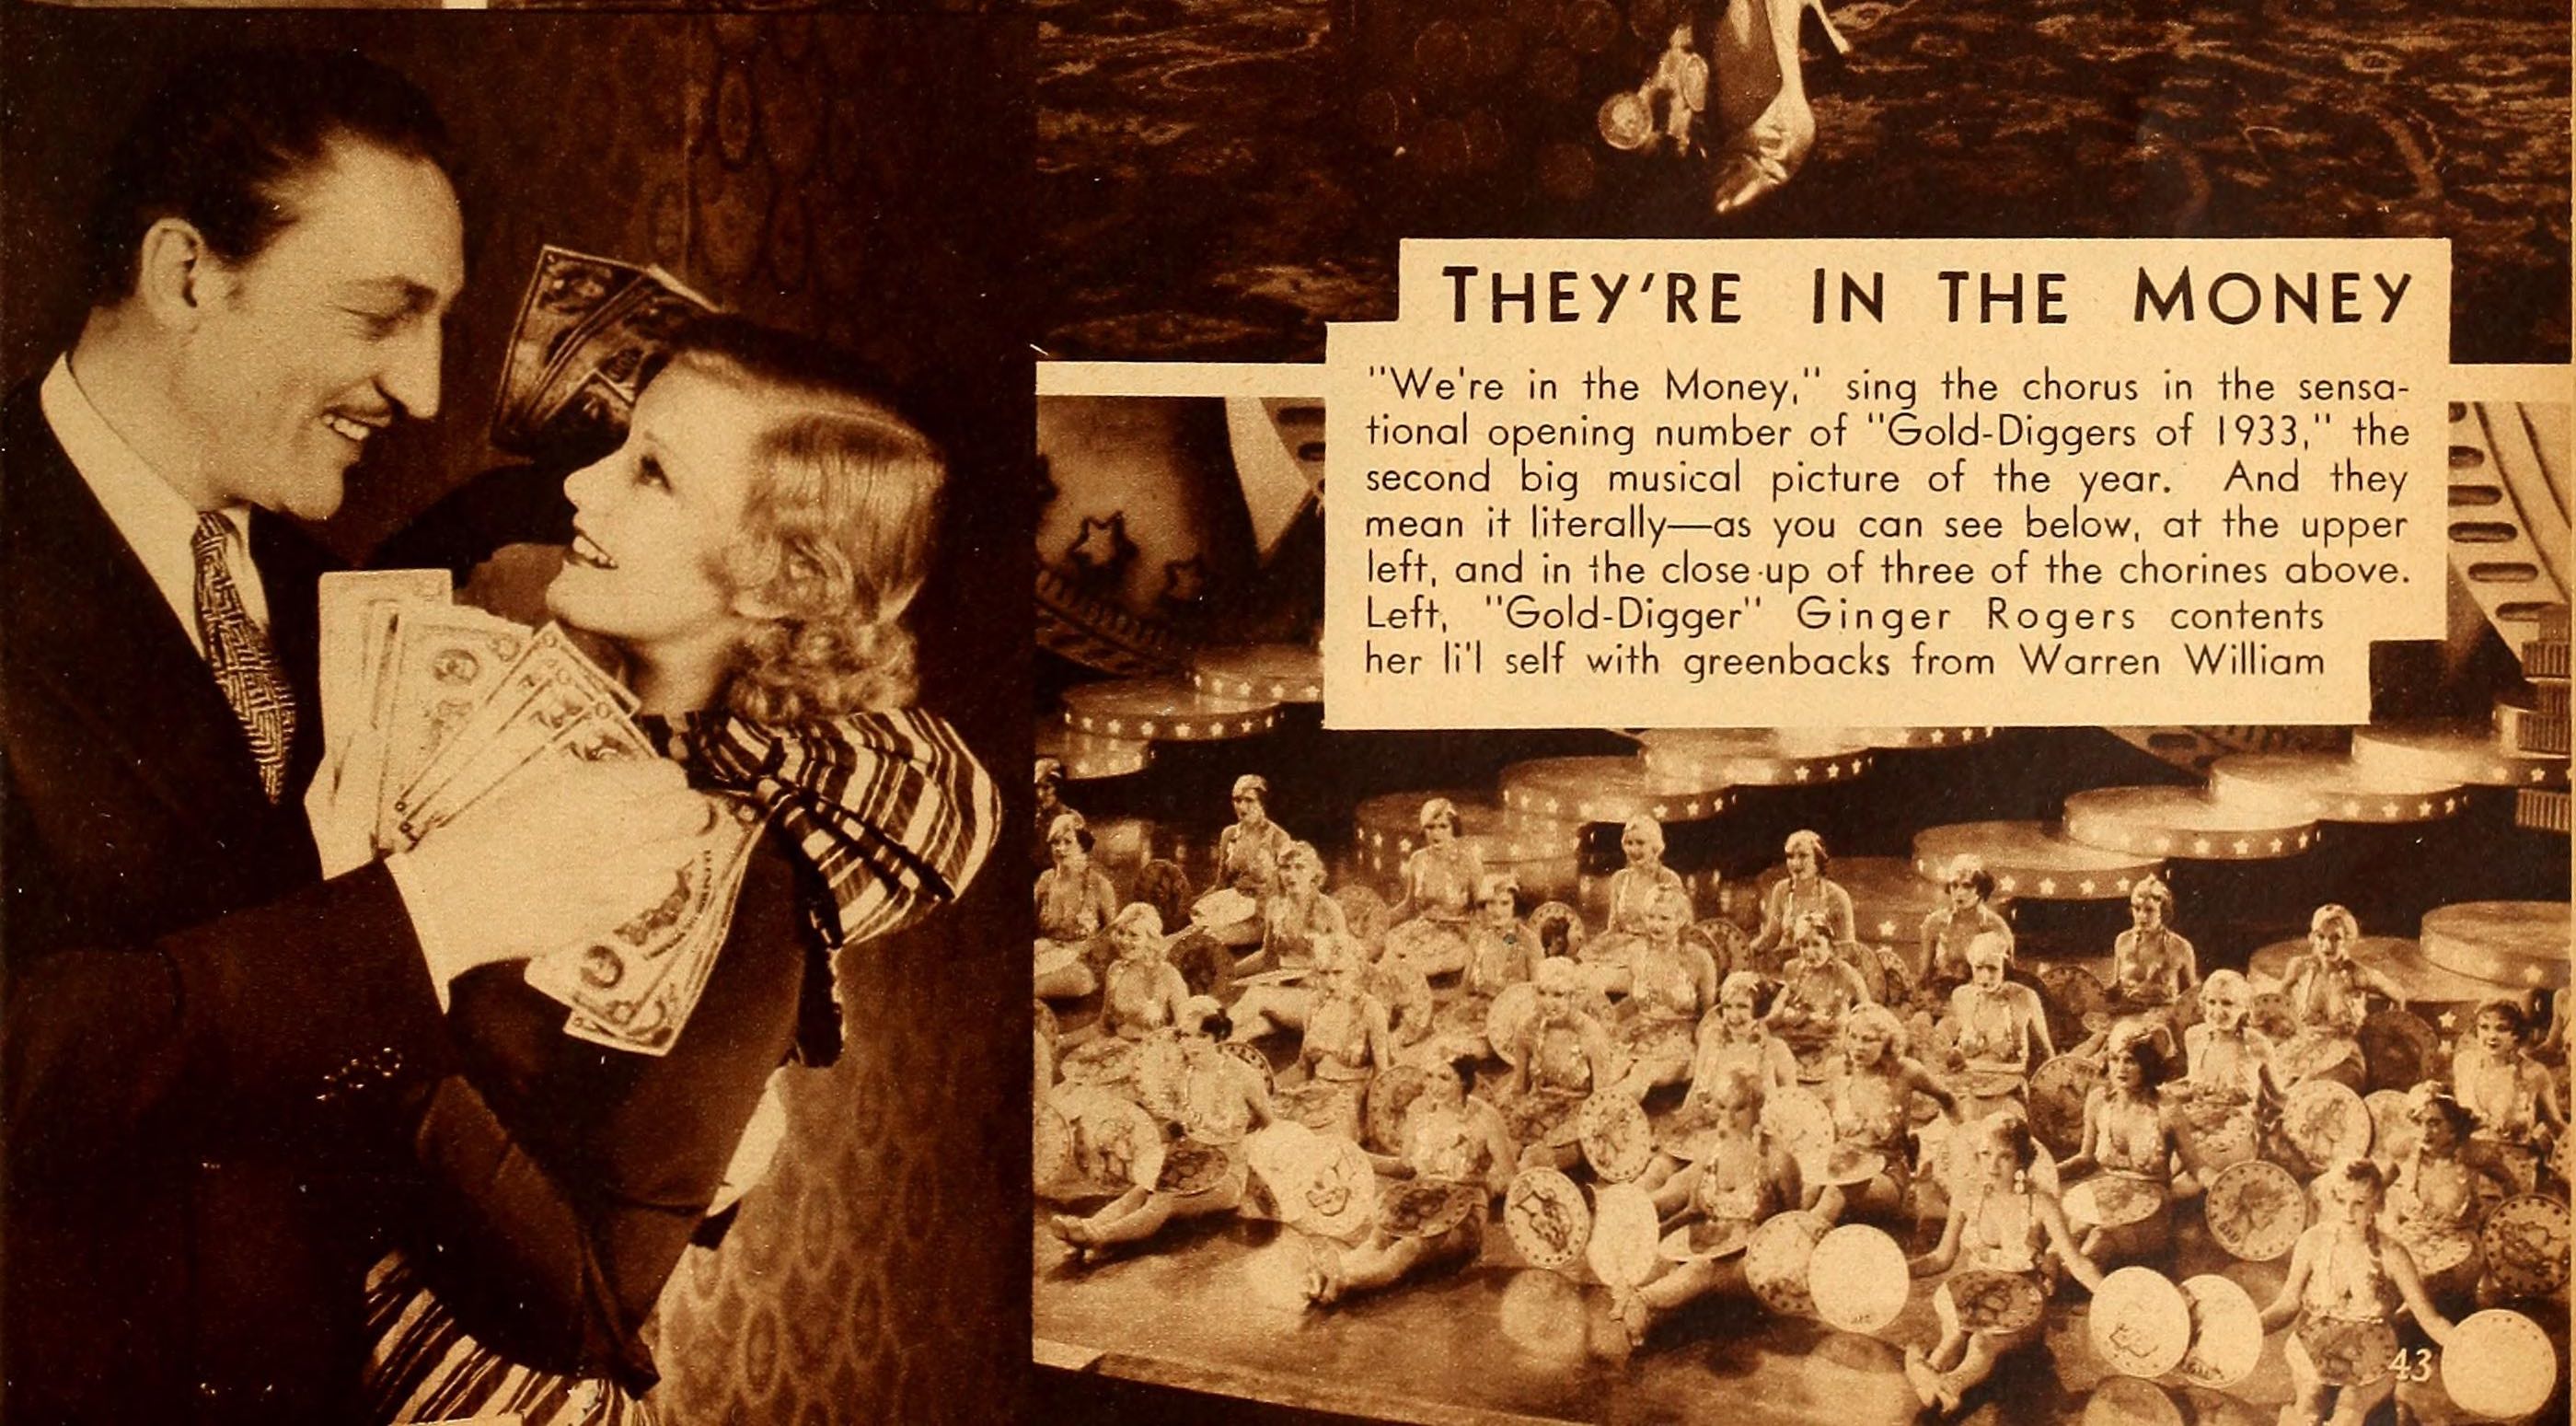 A scan from a magazine. There are several photographs from the film 'Gold-Diggers of 1933' and the heading text 'They're in the Money'